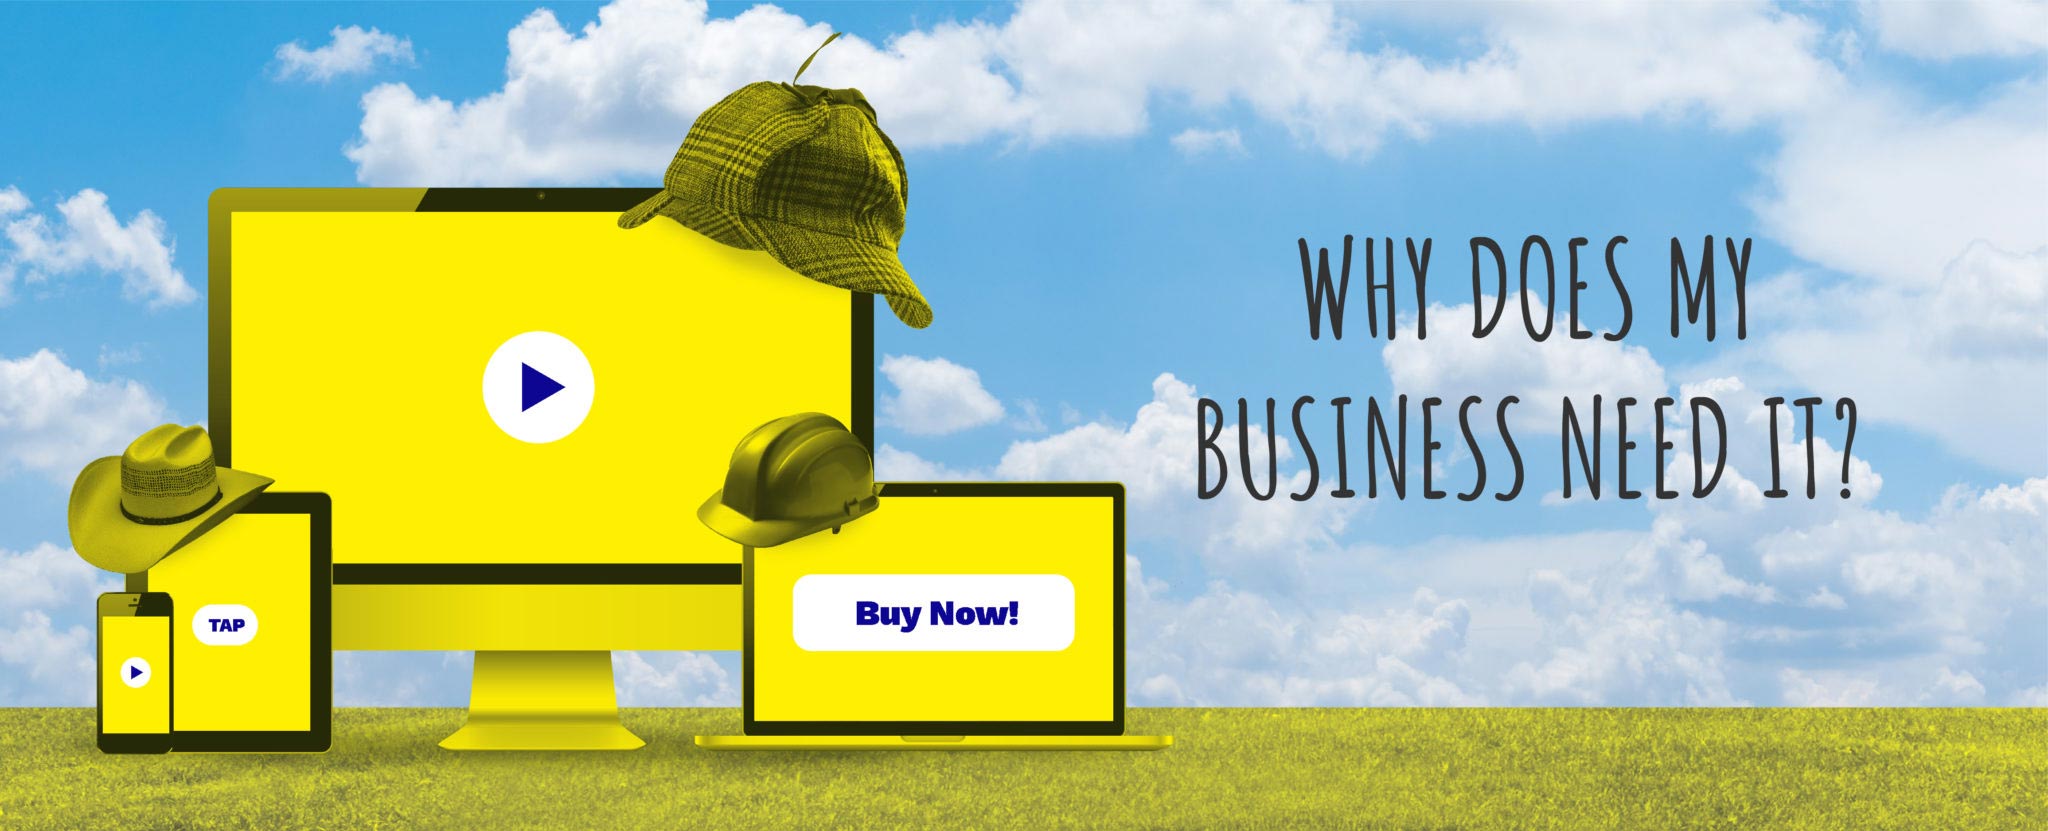 Why Does My Business Need It?